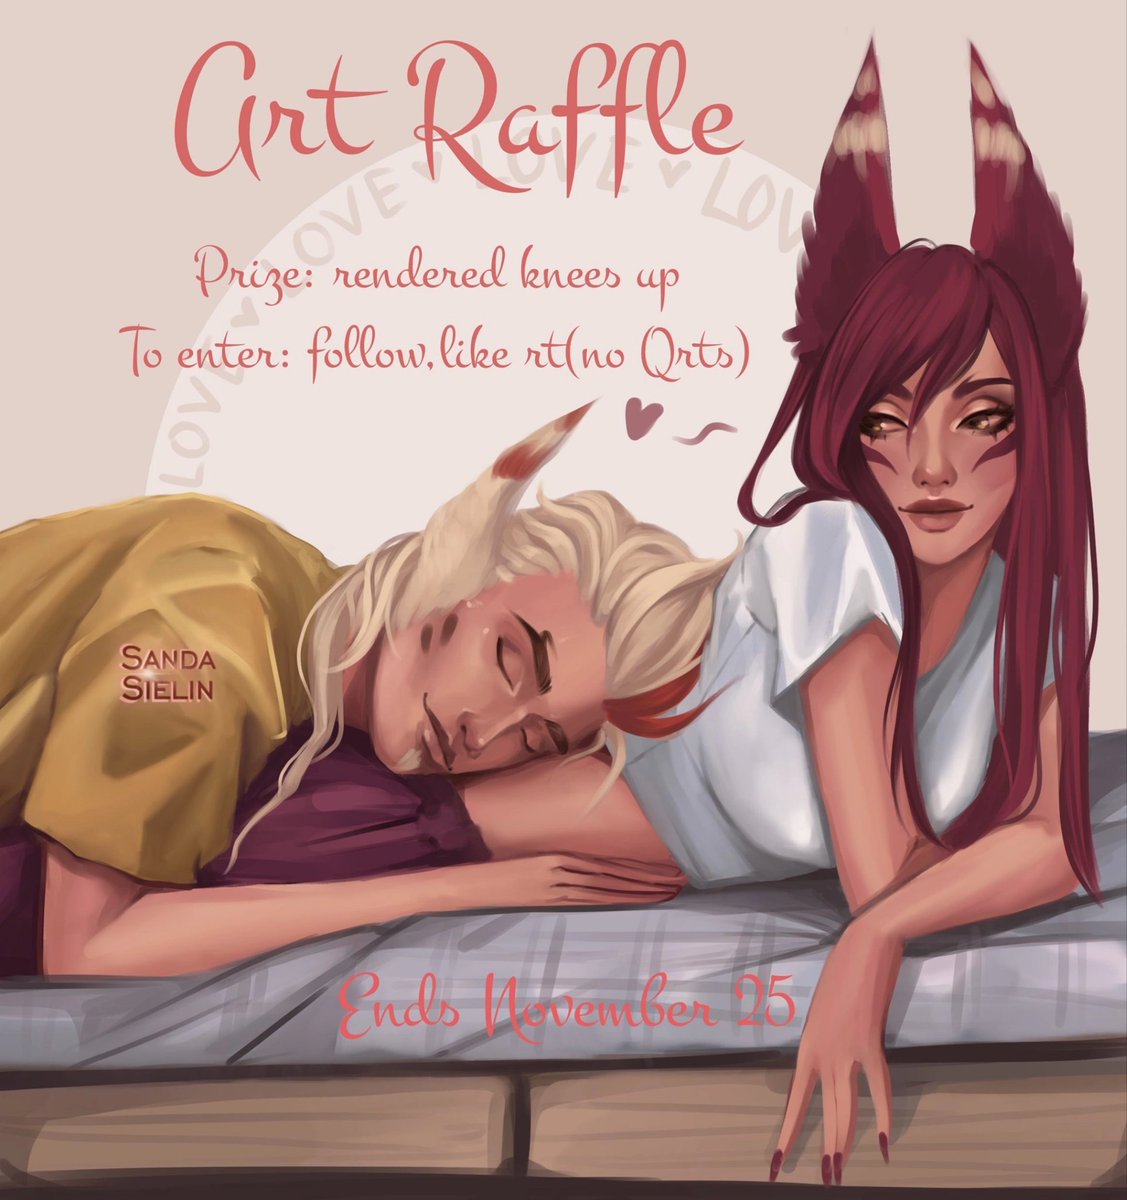 🦊2k Art Raffle 🦊 To enter: •Follow me (new ppl welcome) •Like ans rt this tweet (qrts doesn't count) •Leave a reply with a character you want me to draw (optional tho) Rules are same as for commissions, it just will be free for ya Ends November 25th Good luck ✨